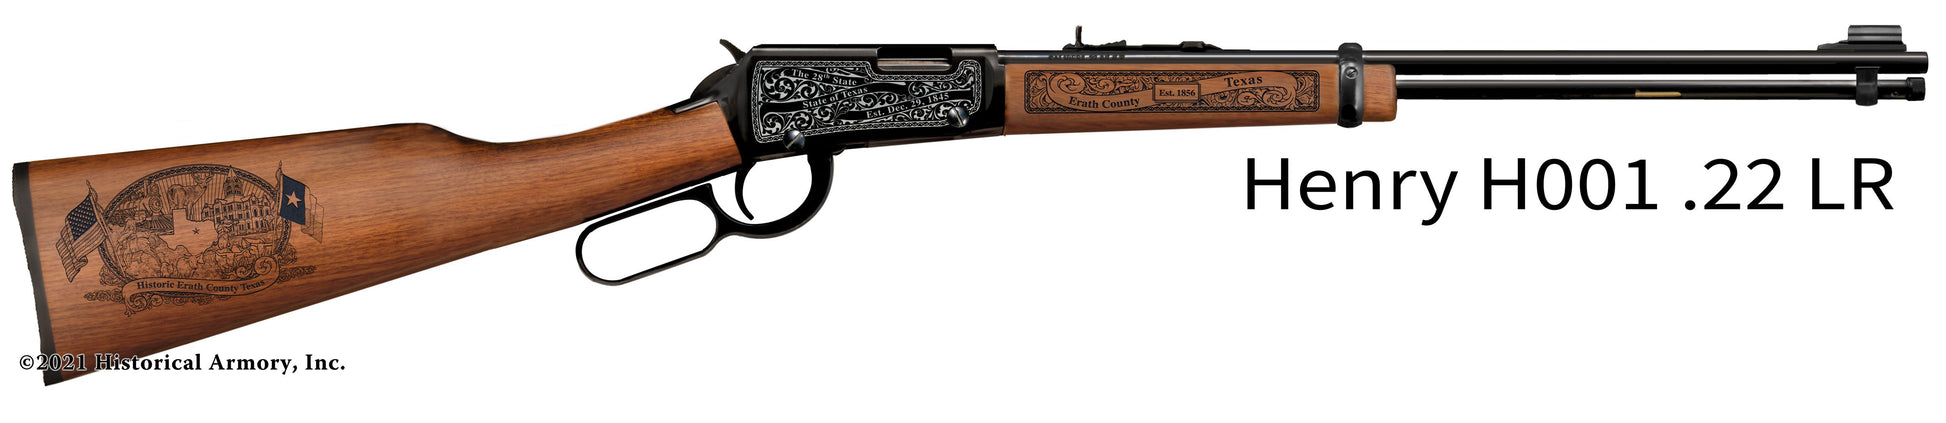 Erath County Texas Engraved Henry H001 Rifle